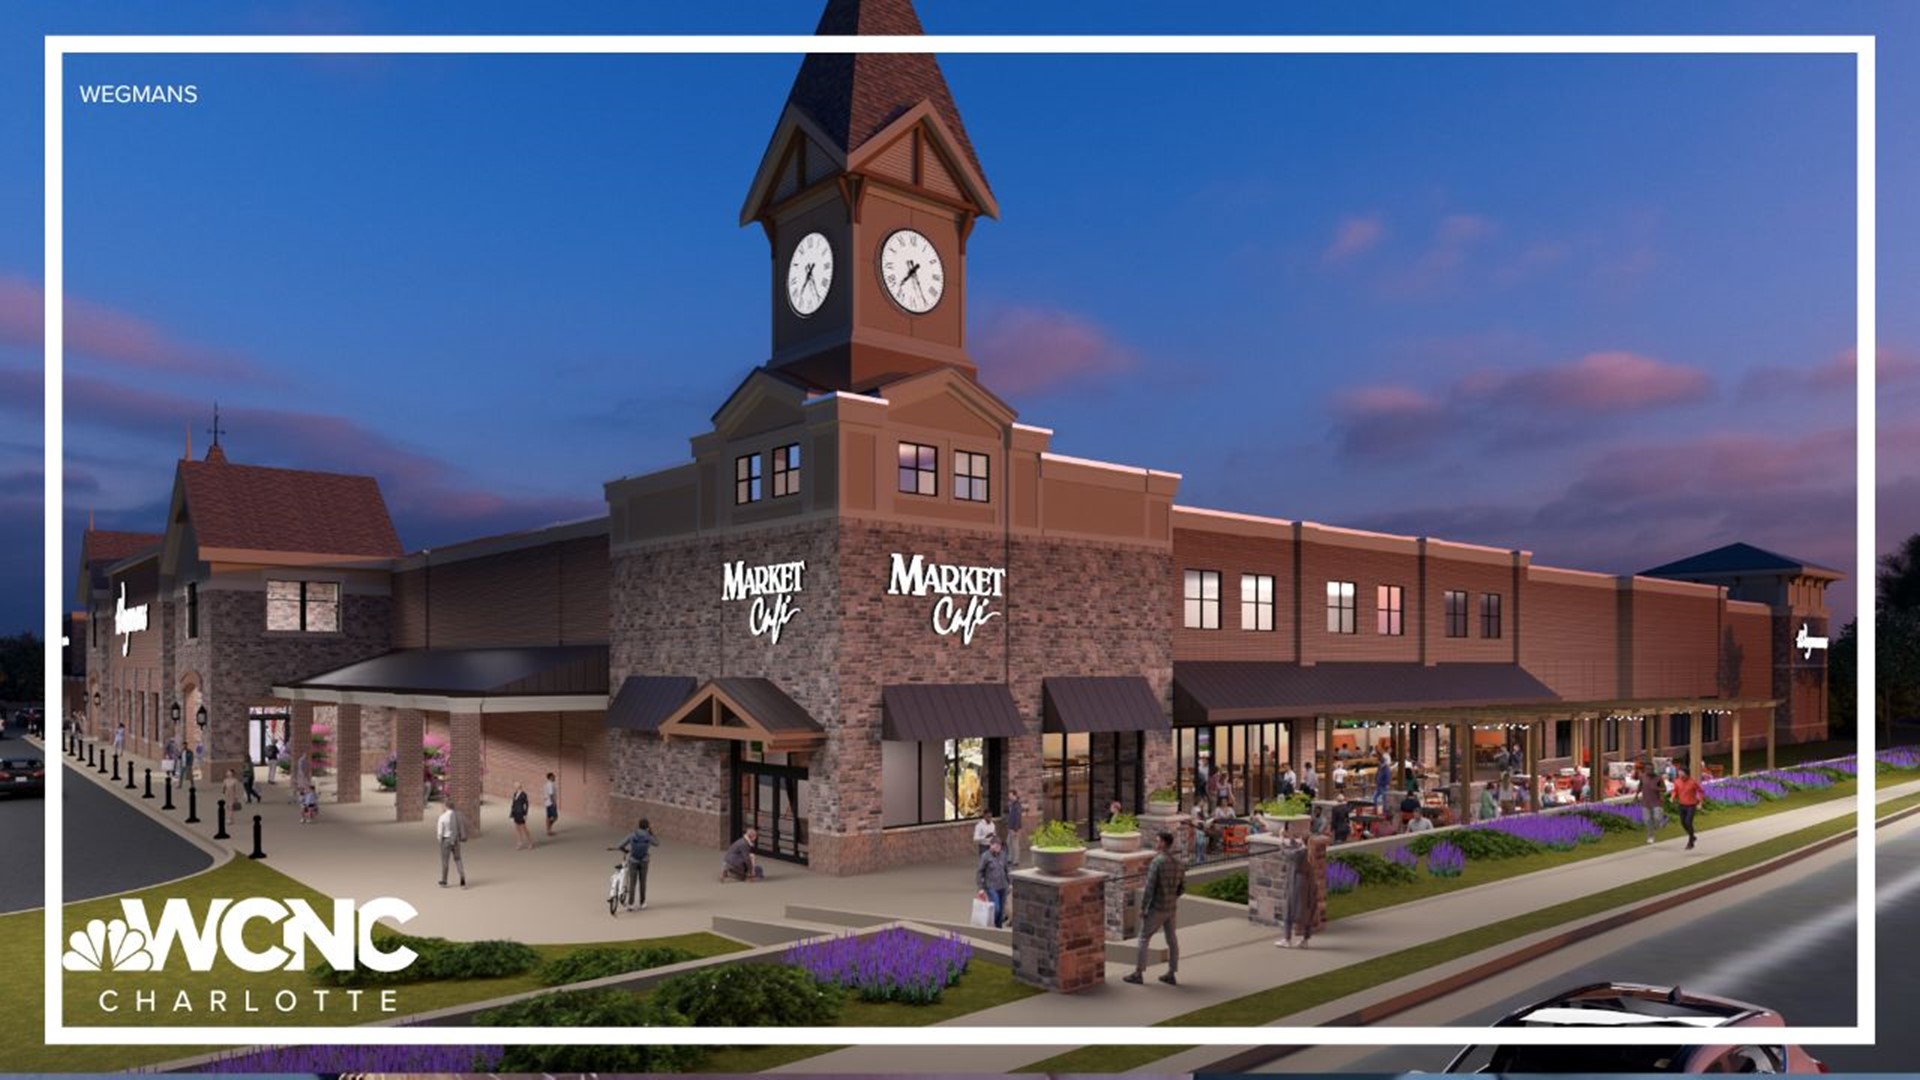 Wegmans, a popular grocery store chain in New York, has announced it plans to open its first Charlotte-area location in Ballantyne.